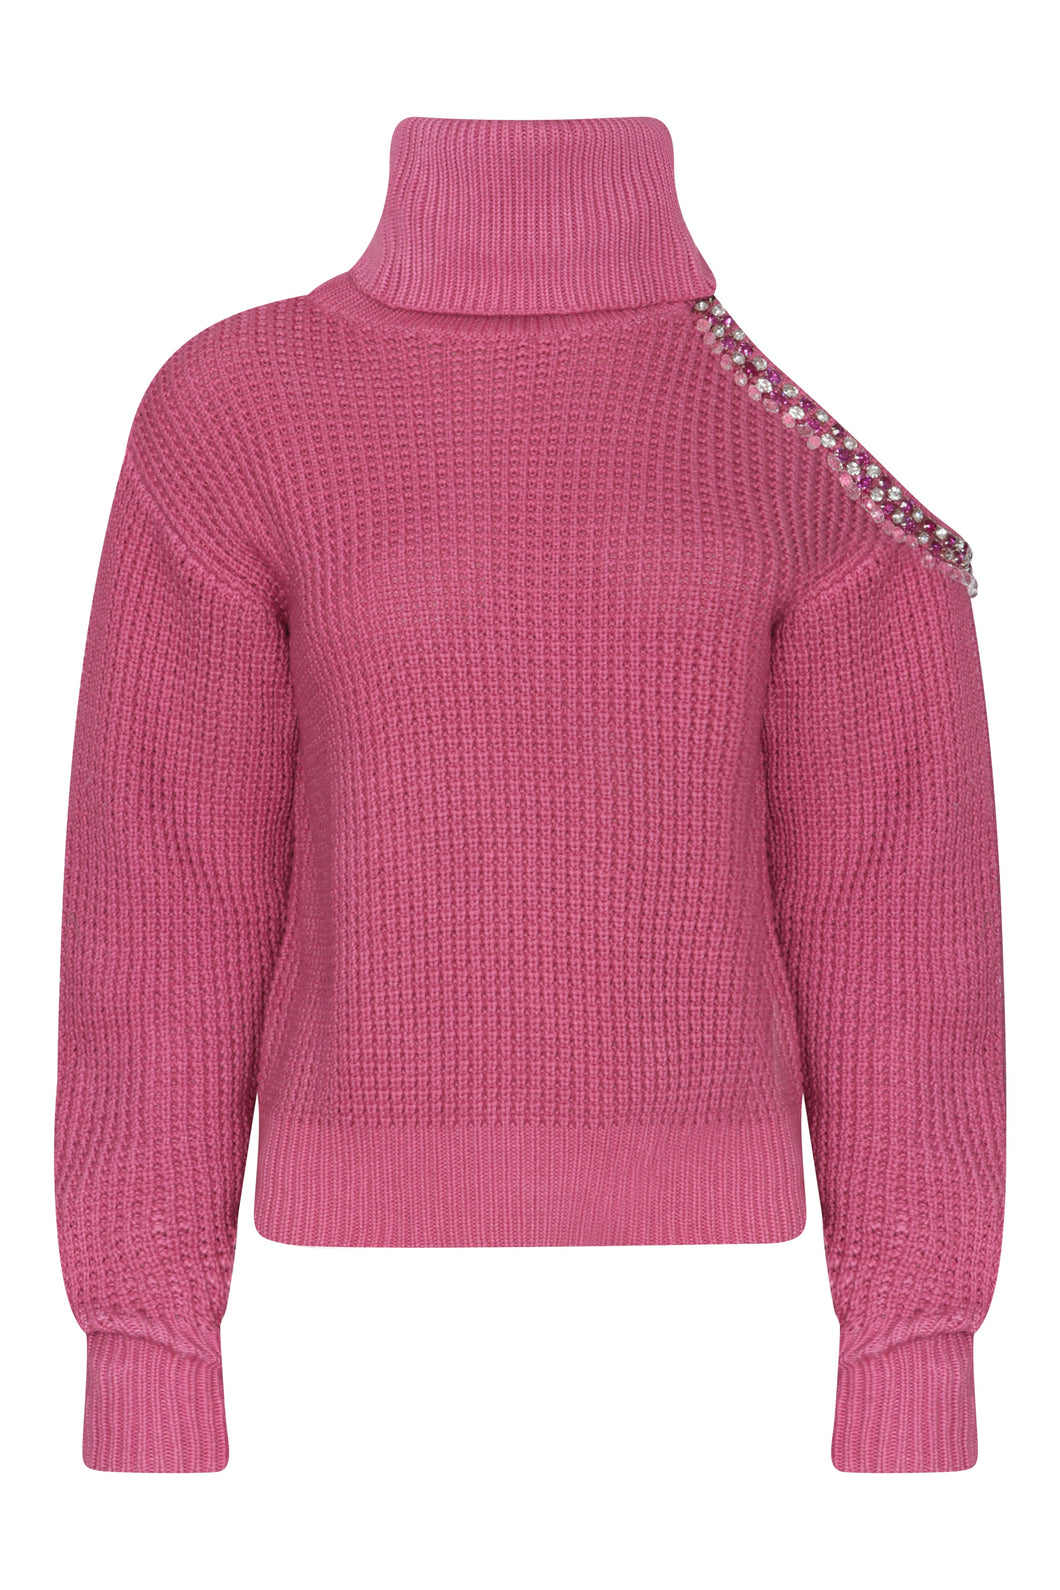 Embellished Cutout Polo Neck Sweater in Magenta